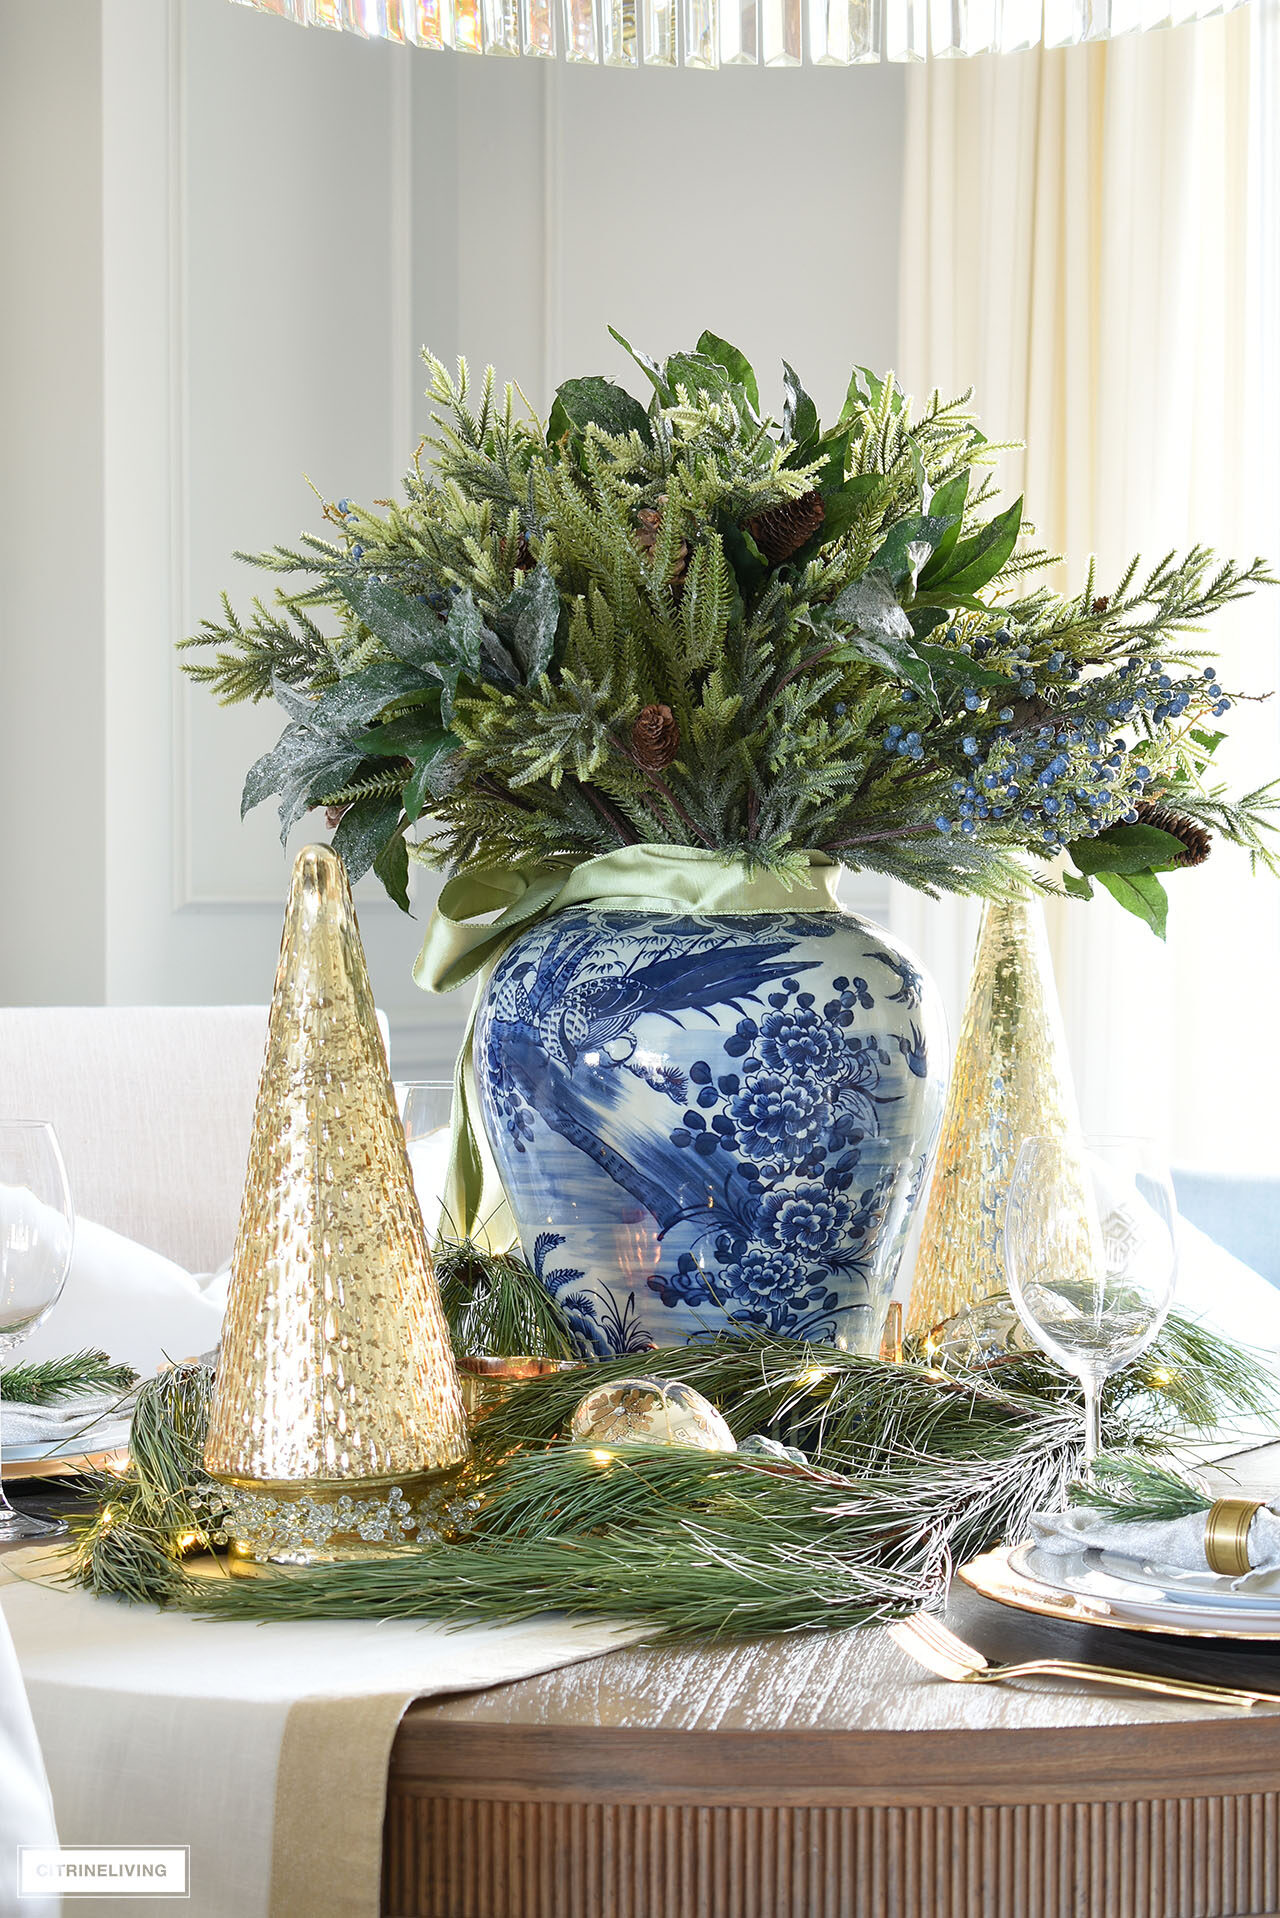 Holiday arrangement with greenery, a blue and white ginger jar and sage green ribbon tied in a bow. Mercury glass christmas trees and fresh pine branches create an elegant cetnerpiece